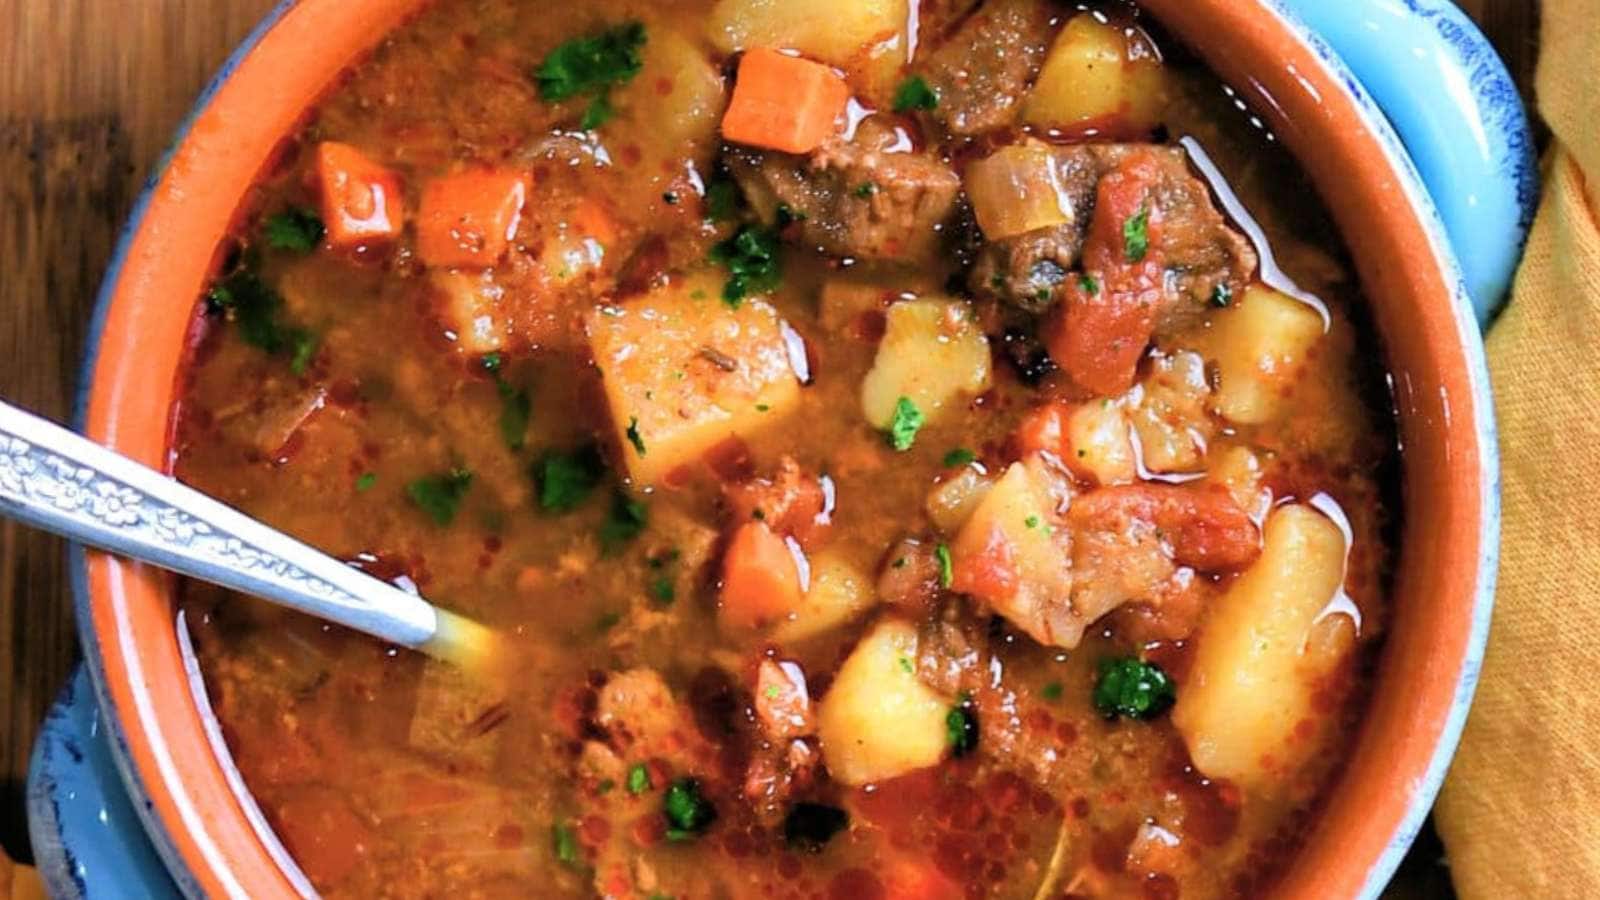 A bowl of stew with chorizo and venison.